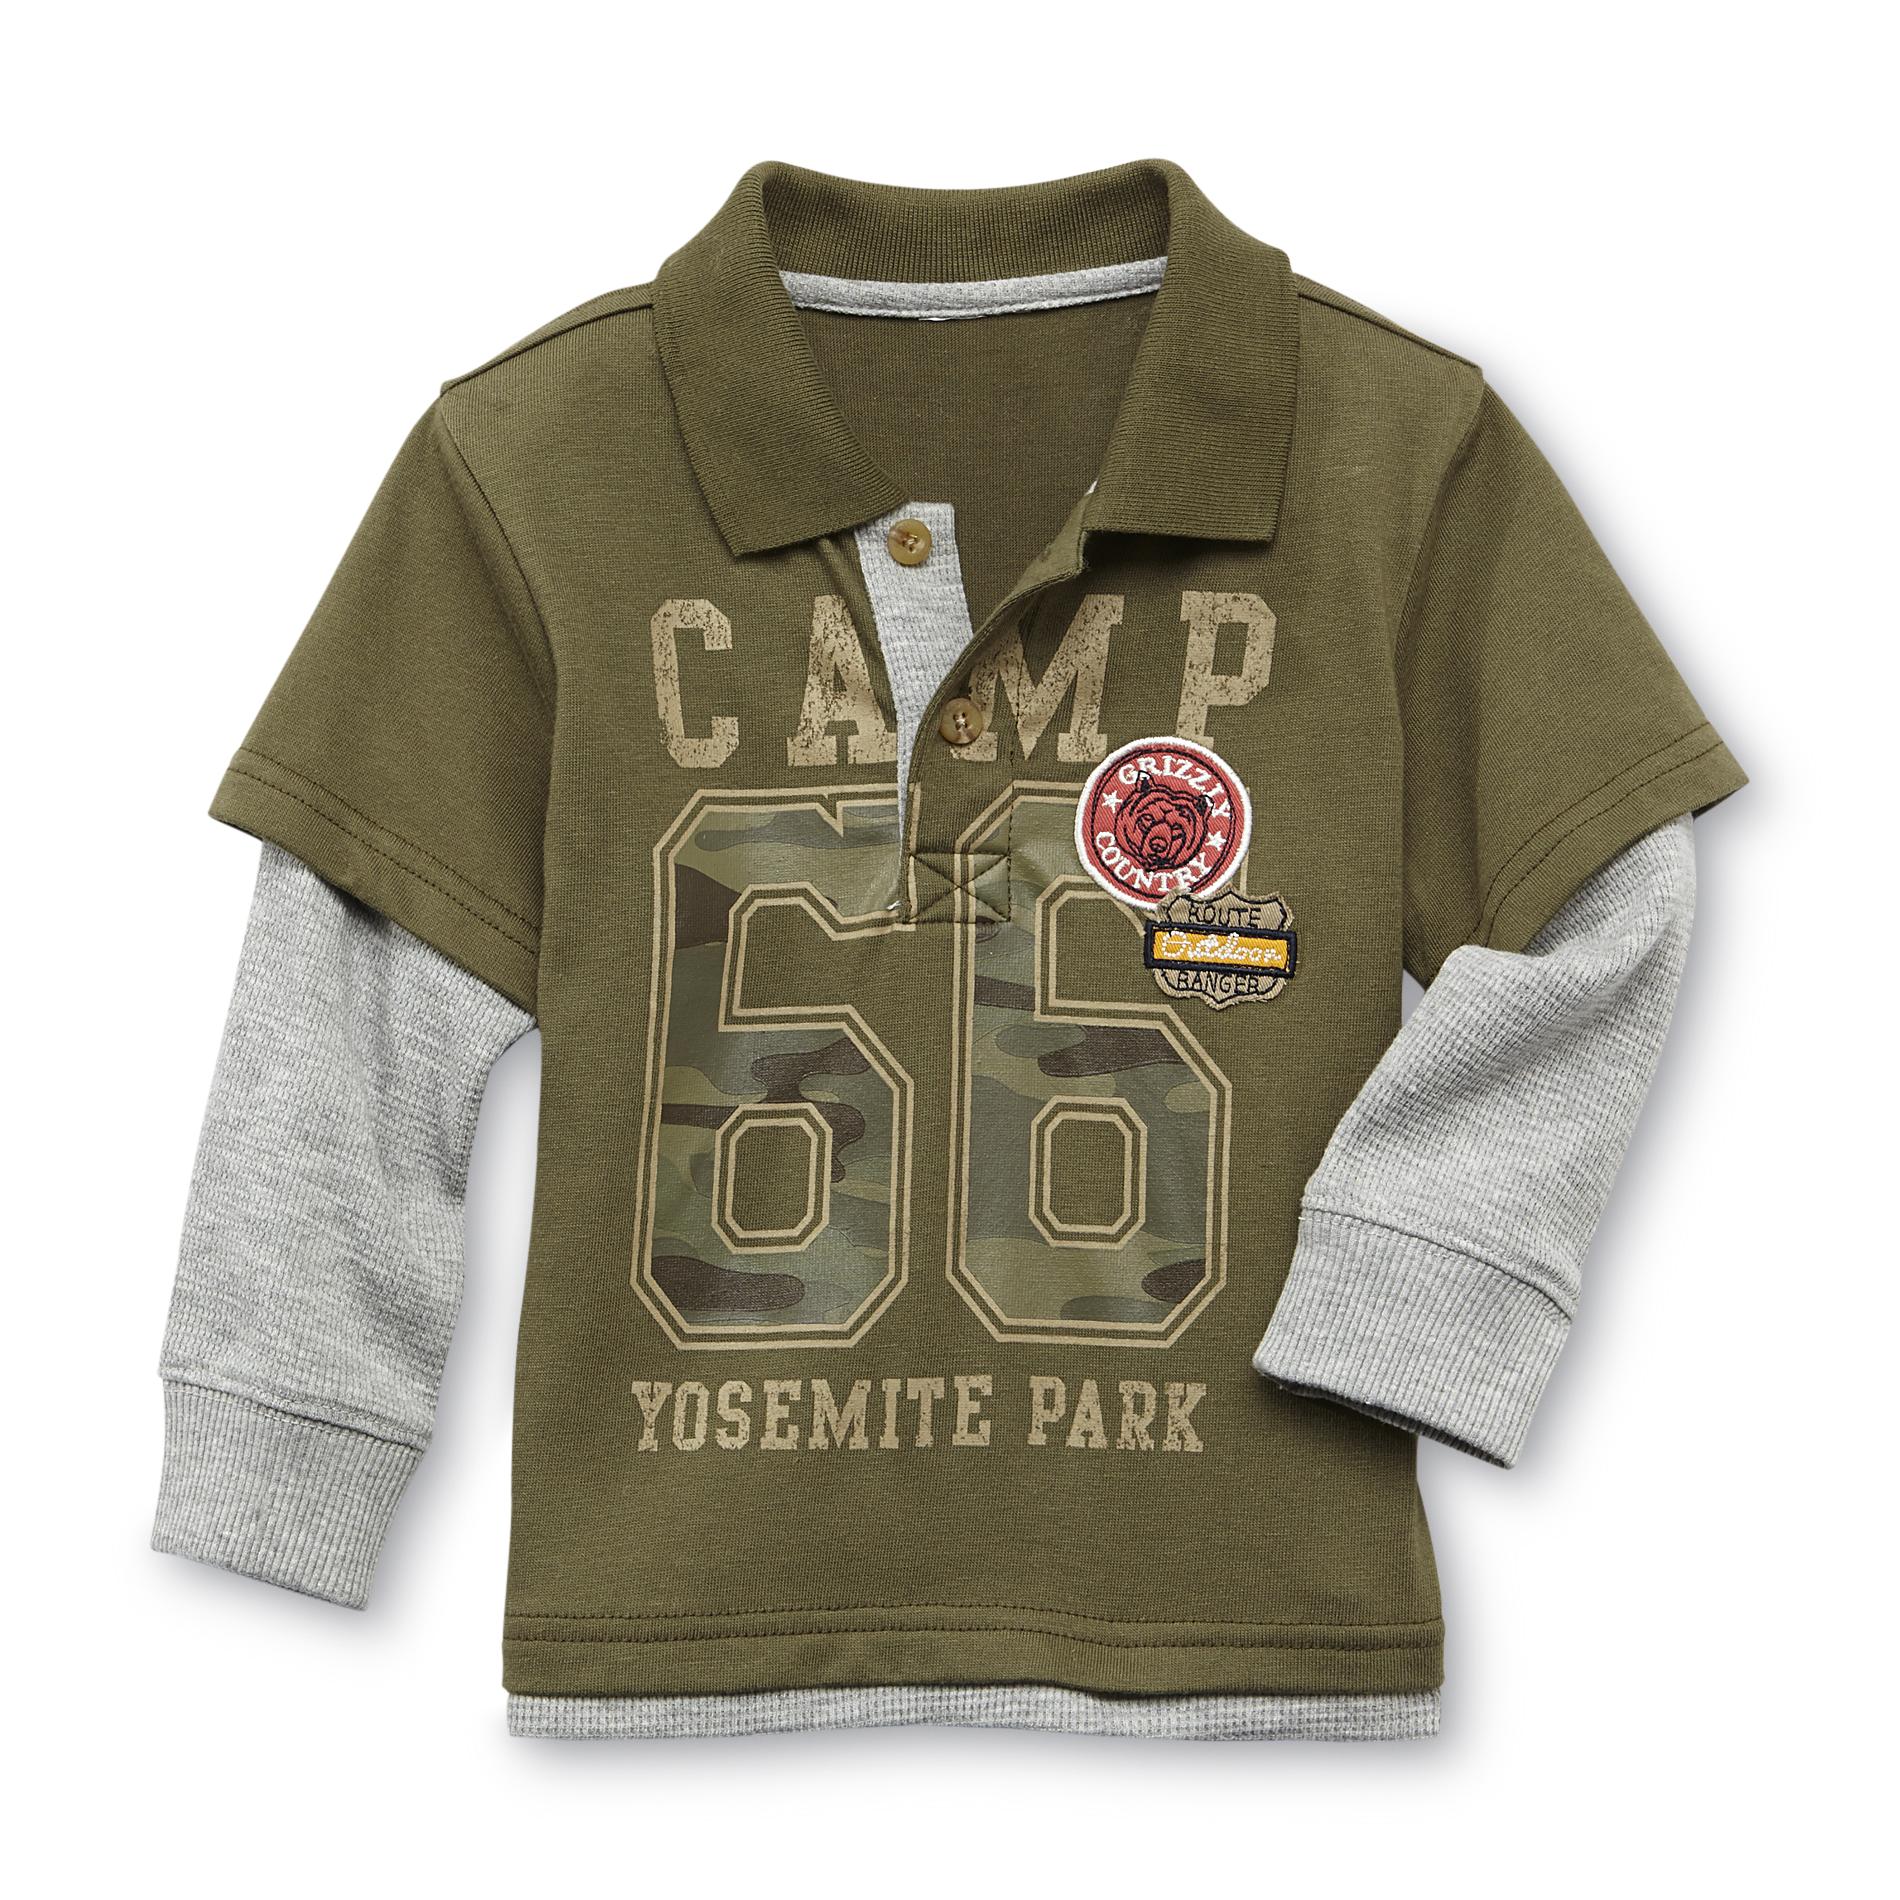 Route 66 Baby Infant & Toddler Boy's Layered-Look Polo Shirt - Yosemite Bear